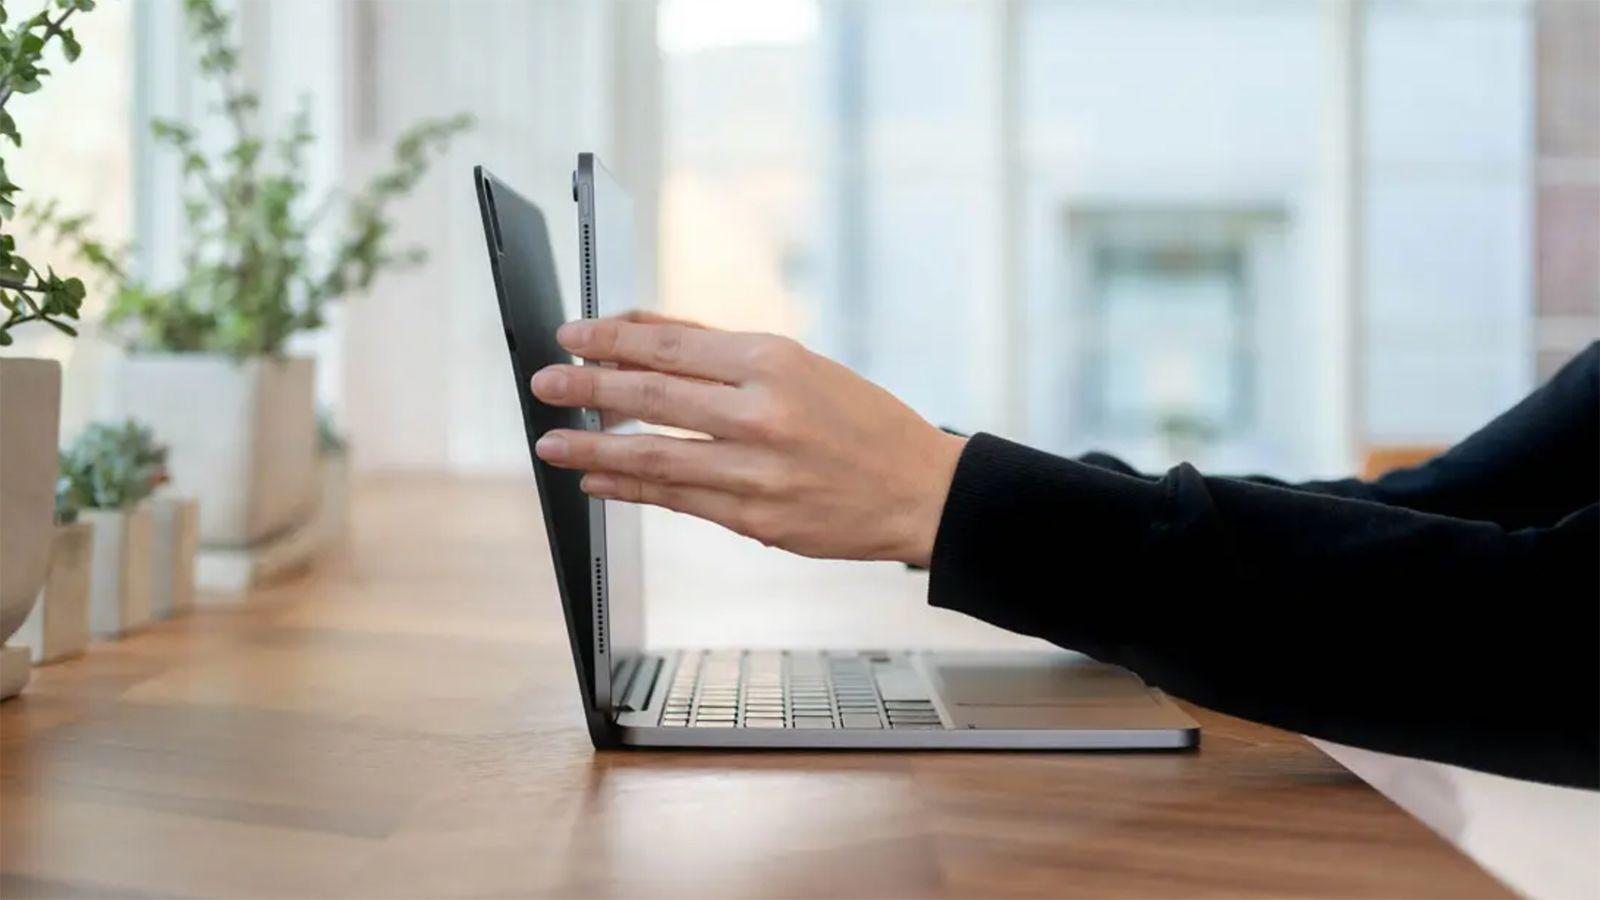 The Brydge Max+ iPad Pro keyboard turns your tablet into a MacBook | CNN Underscored